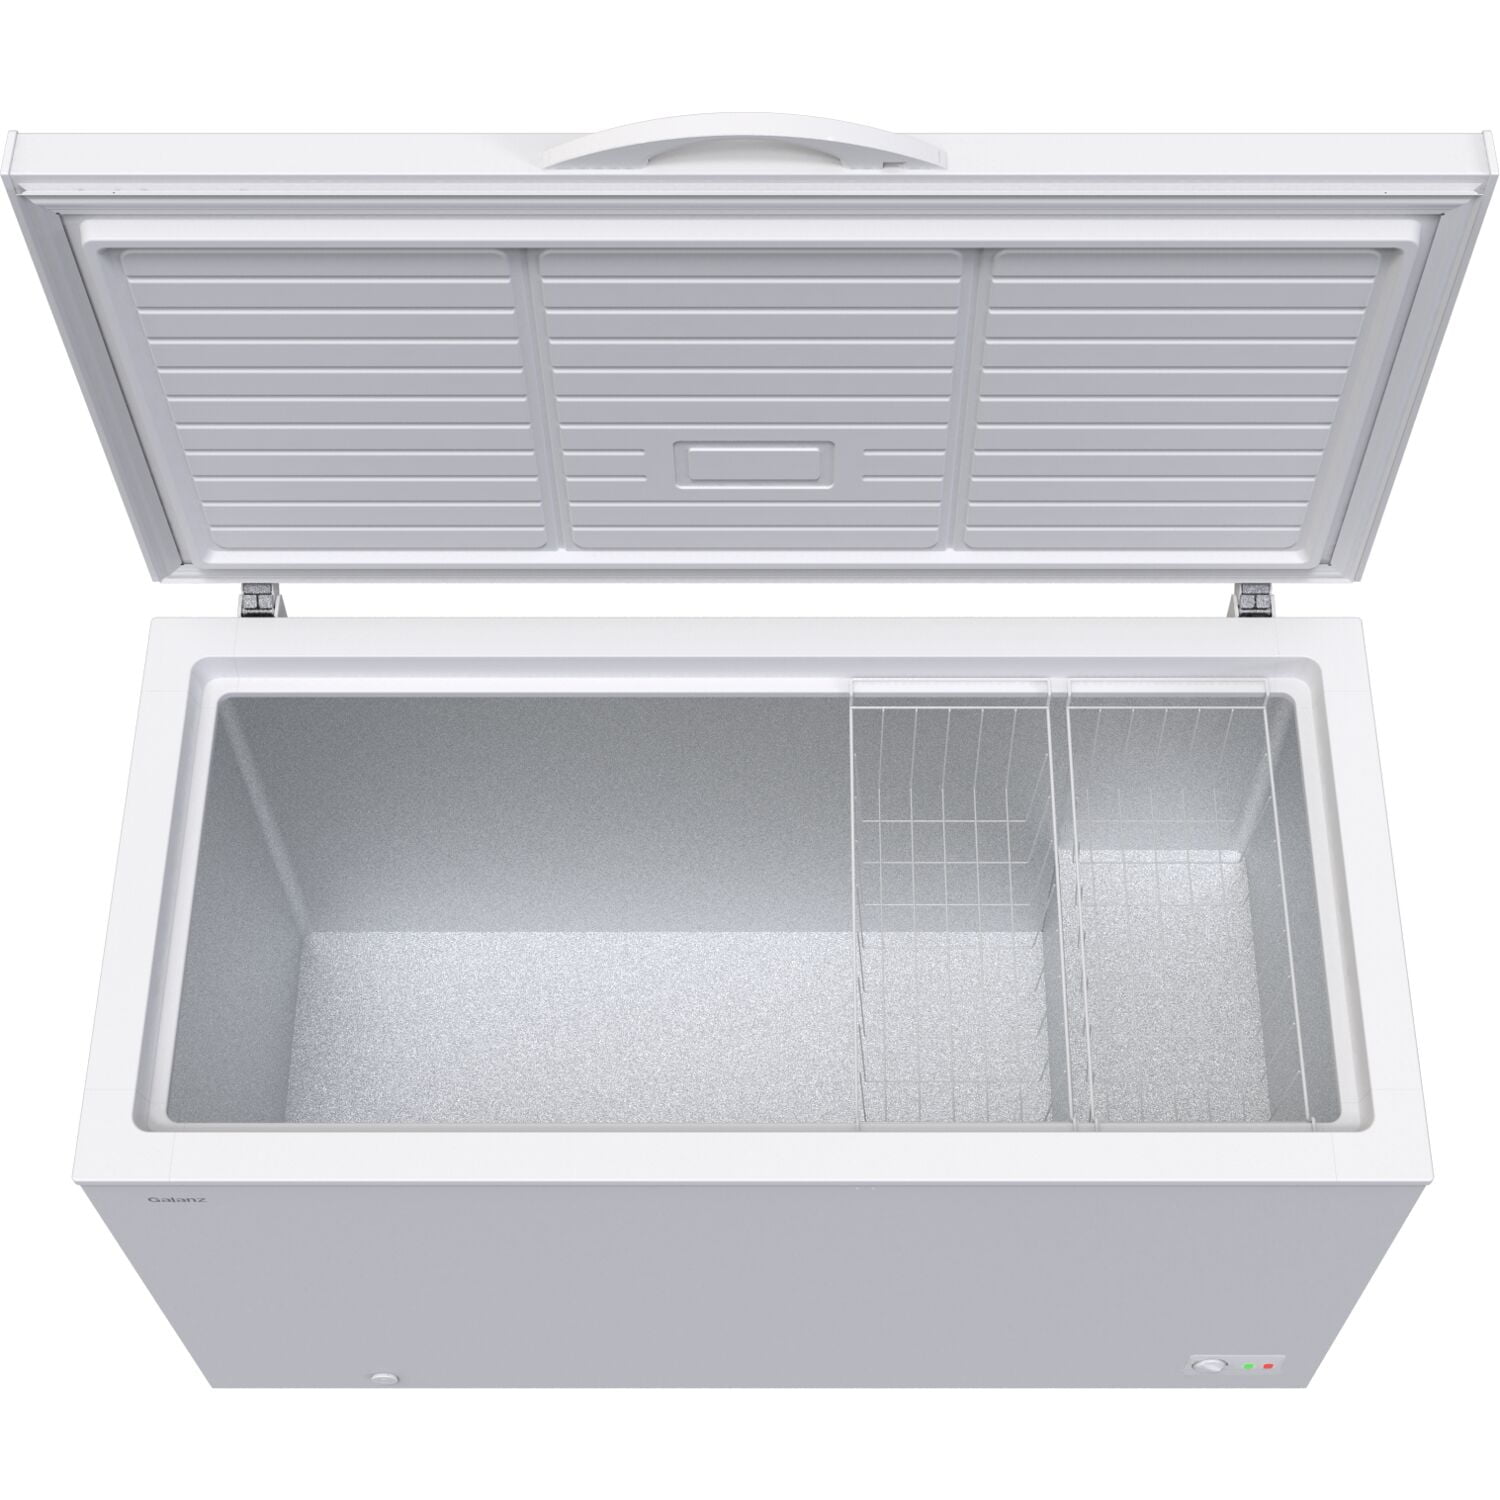 Galanz 14-Cu. Ft. Manual Defrost Chest Freezer in White